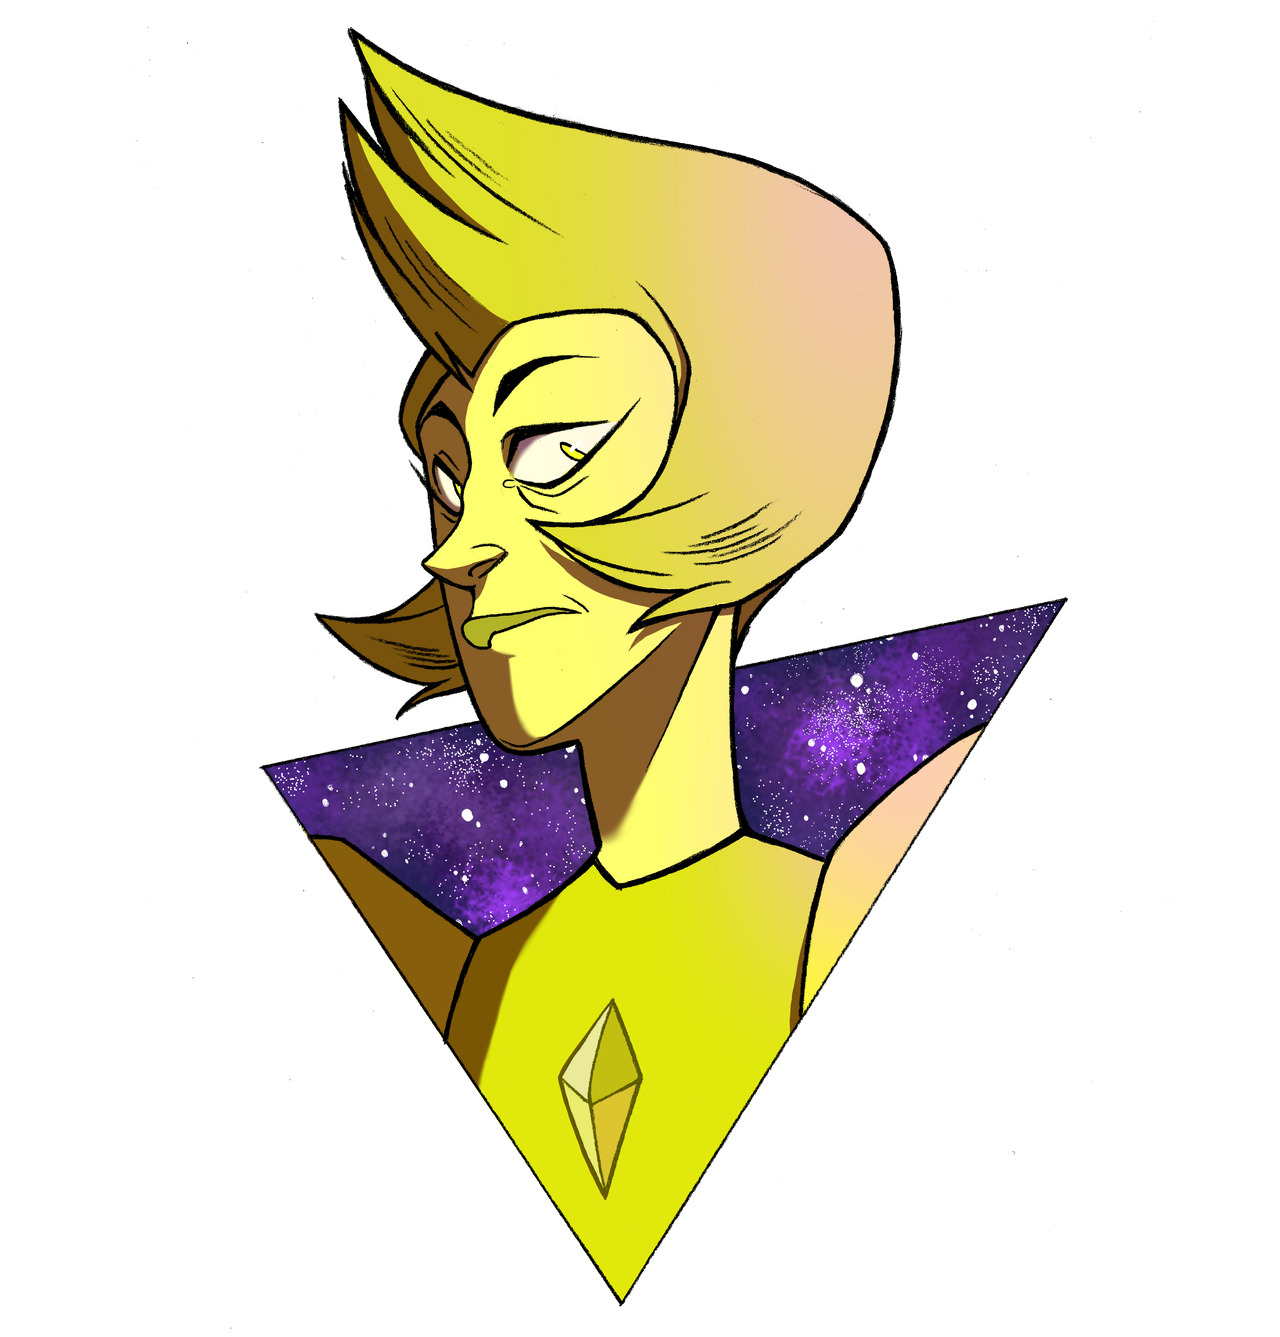 Yellow Diamond from Steven Universe. If you want, support me on ko-fi.com/grubby